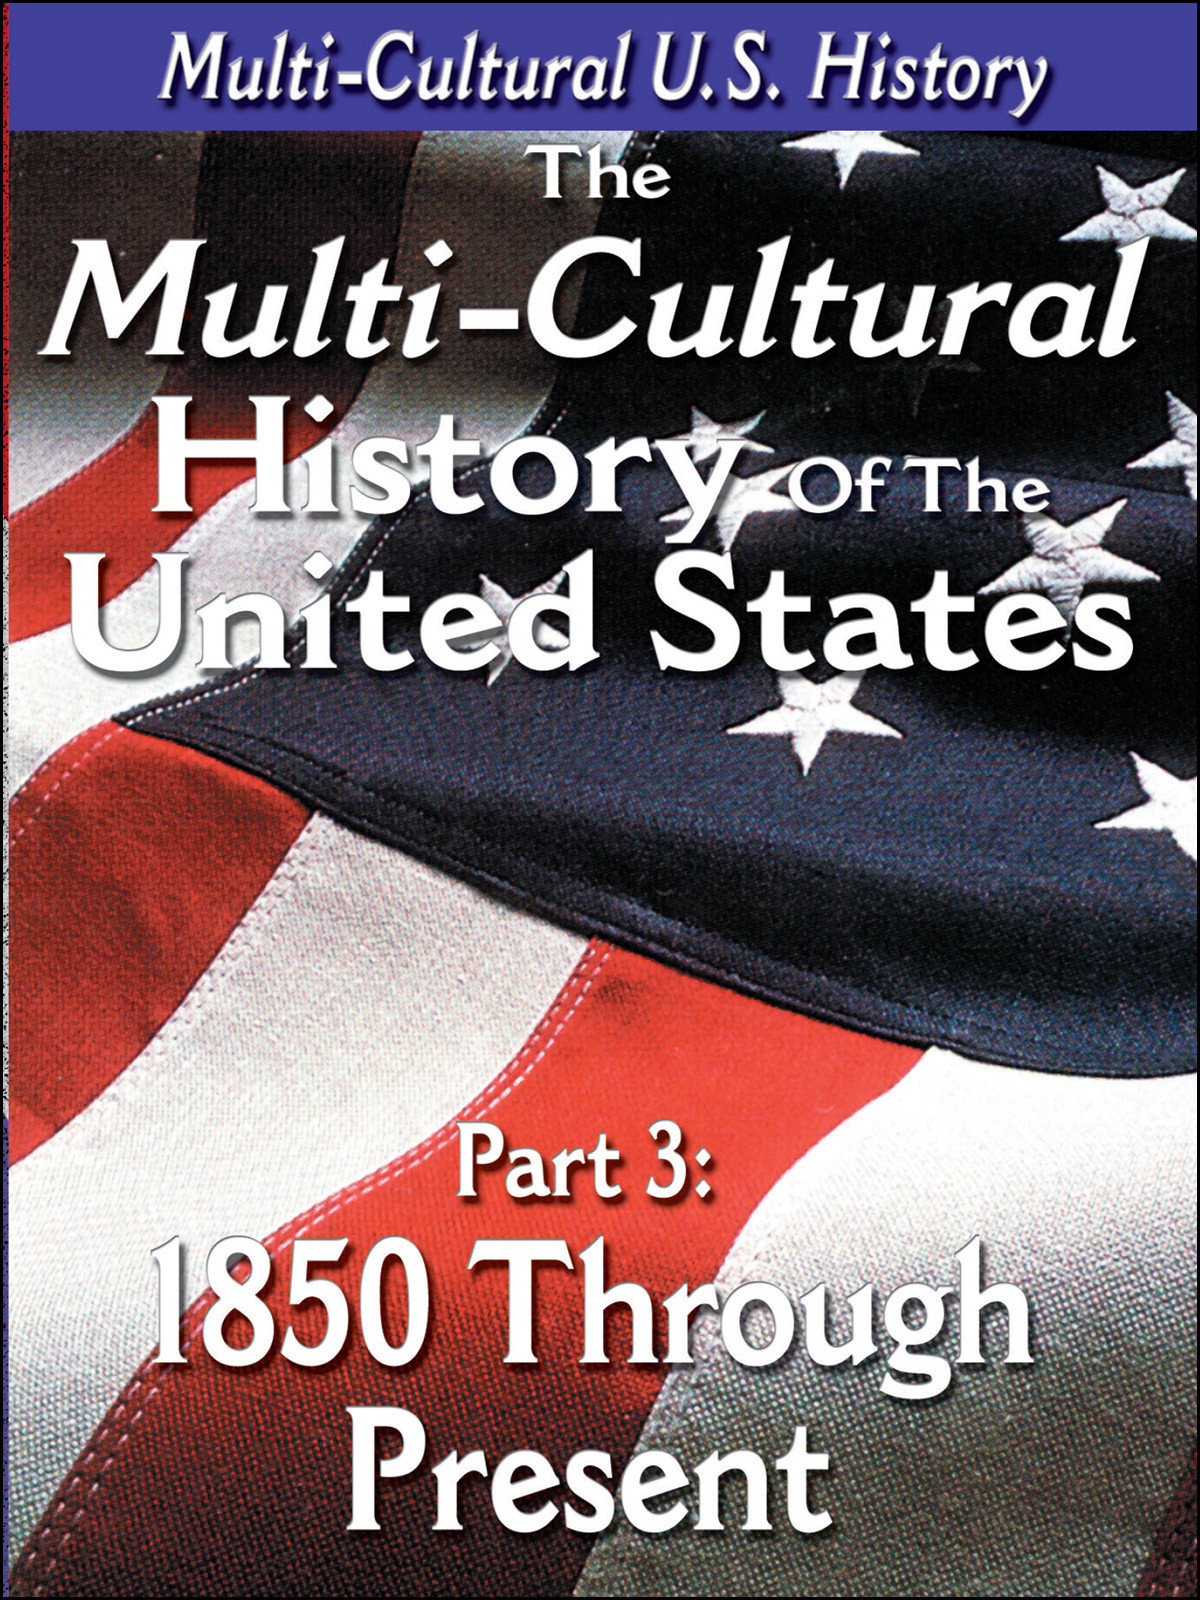 L919 - The History of the United States 1850 through Present Day